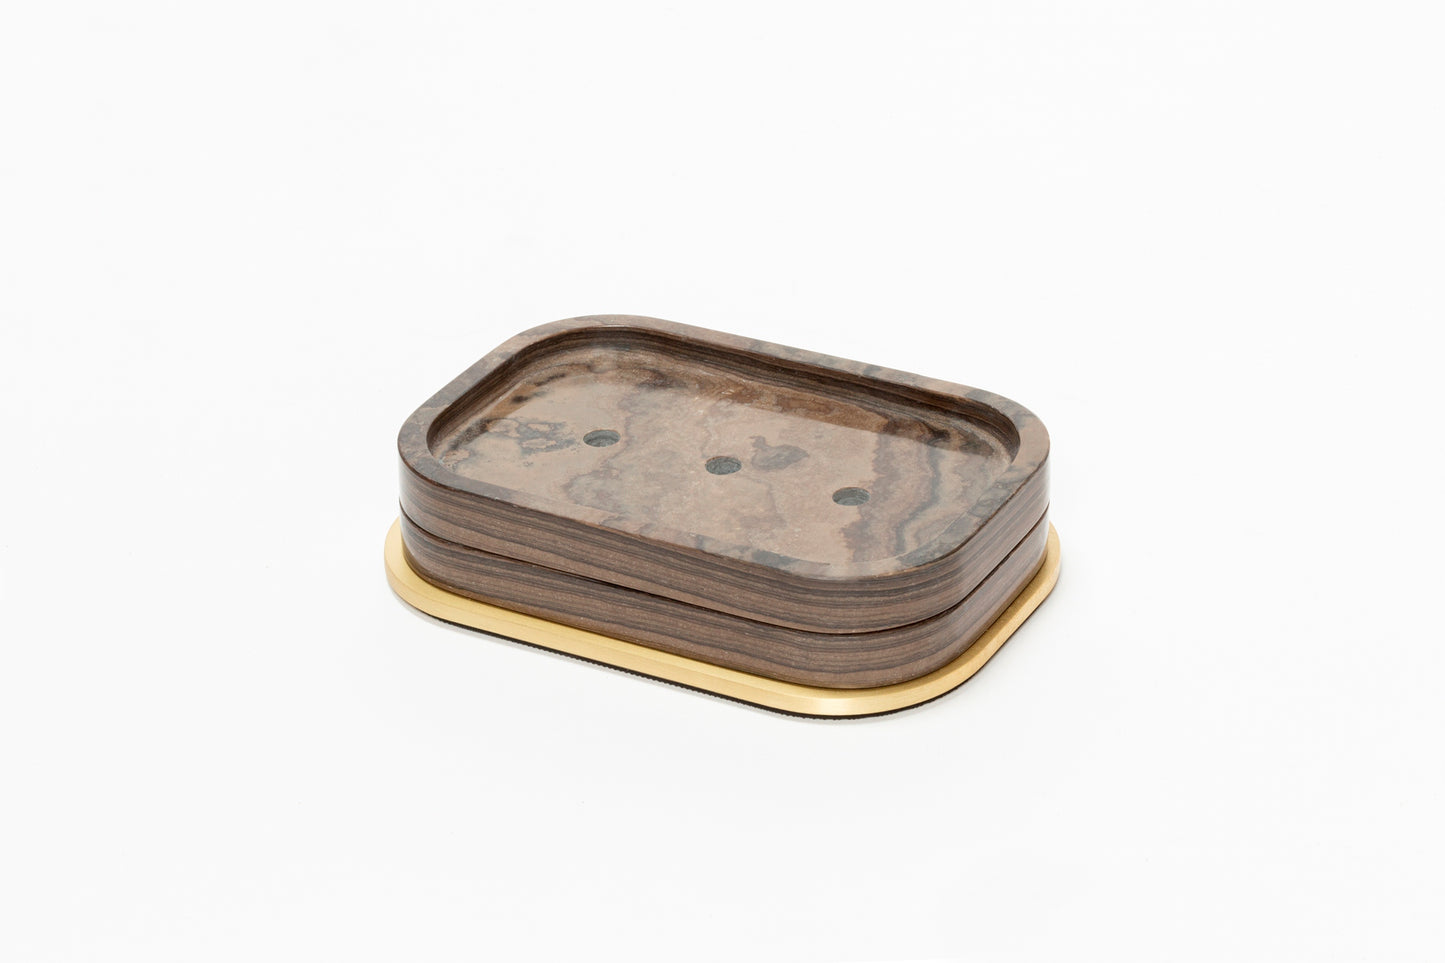 Giobagnara Polo Marble Rectangular Soap Bowl | Marble Structure with Brass Base Frame | Non-Slip Waterproof Rubber Base | Part of Polo Marble Bathroom Set | Iconic Silhouette with Rounded Corners | Unique and Exclusive Design | Explore the Polo Marble Bathroom Collection at 2Jour Concierge, #1 luxury high-end gift & lifestyle shop